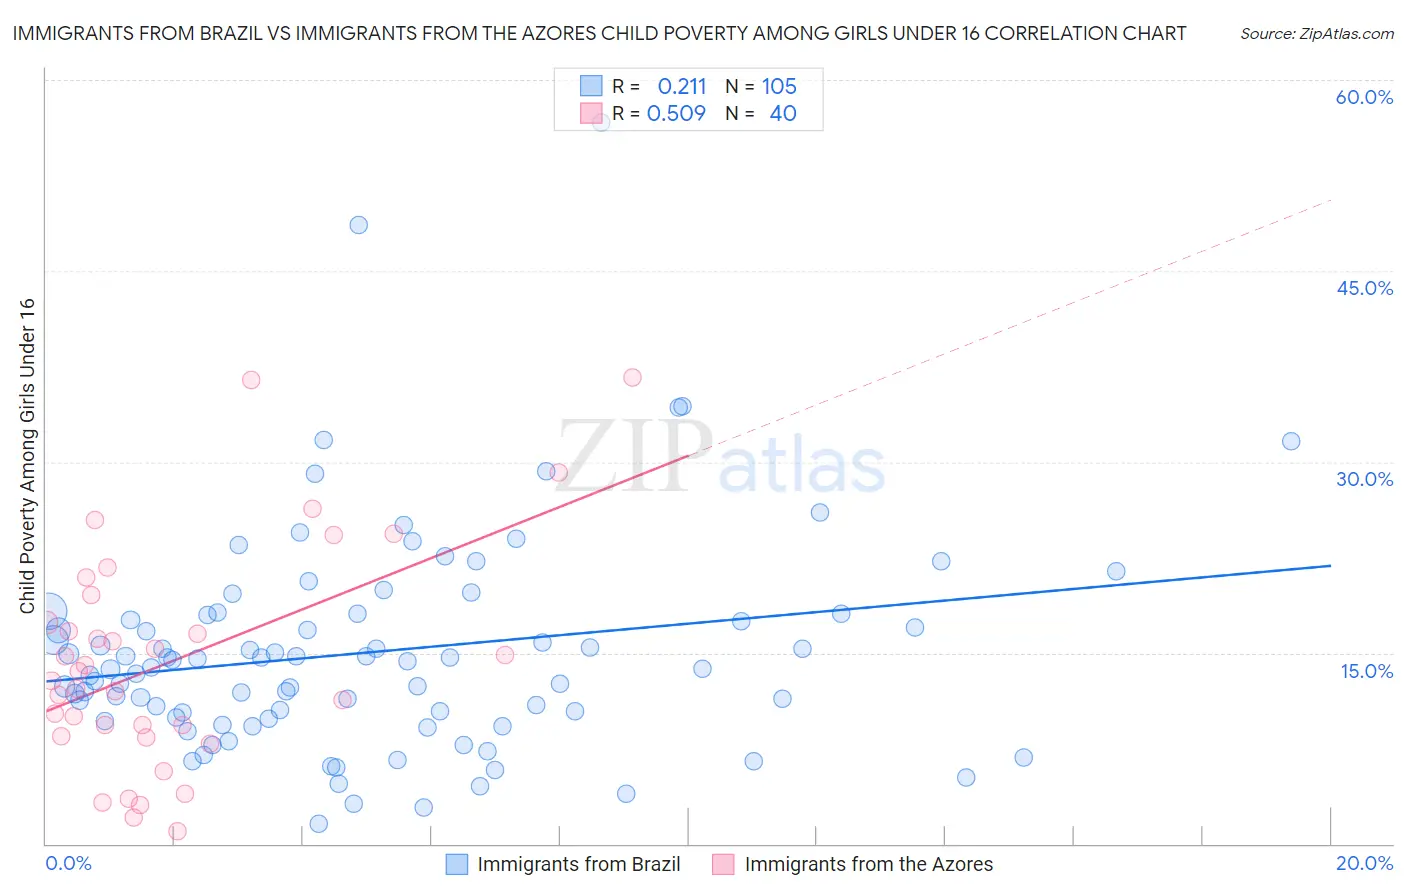 Immigrants from Brazil vs Immigrants from the Azores Child Poverty Among Girls Under 16